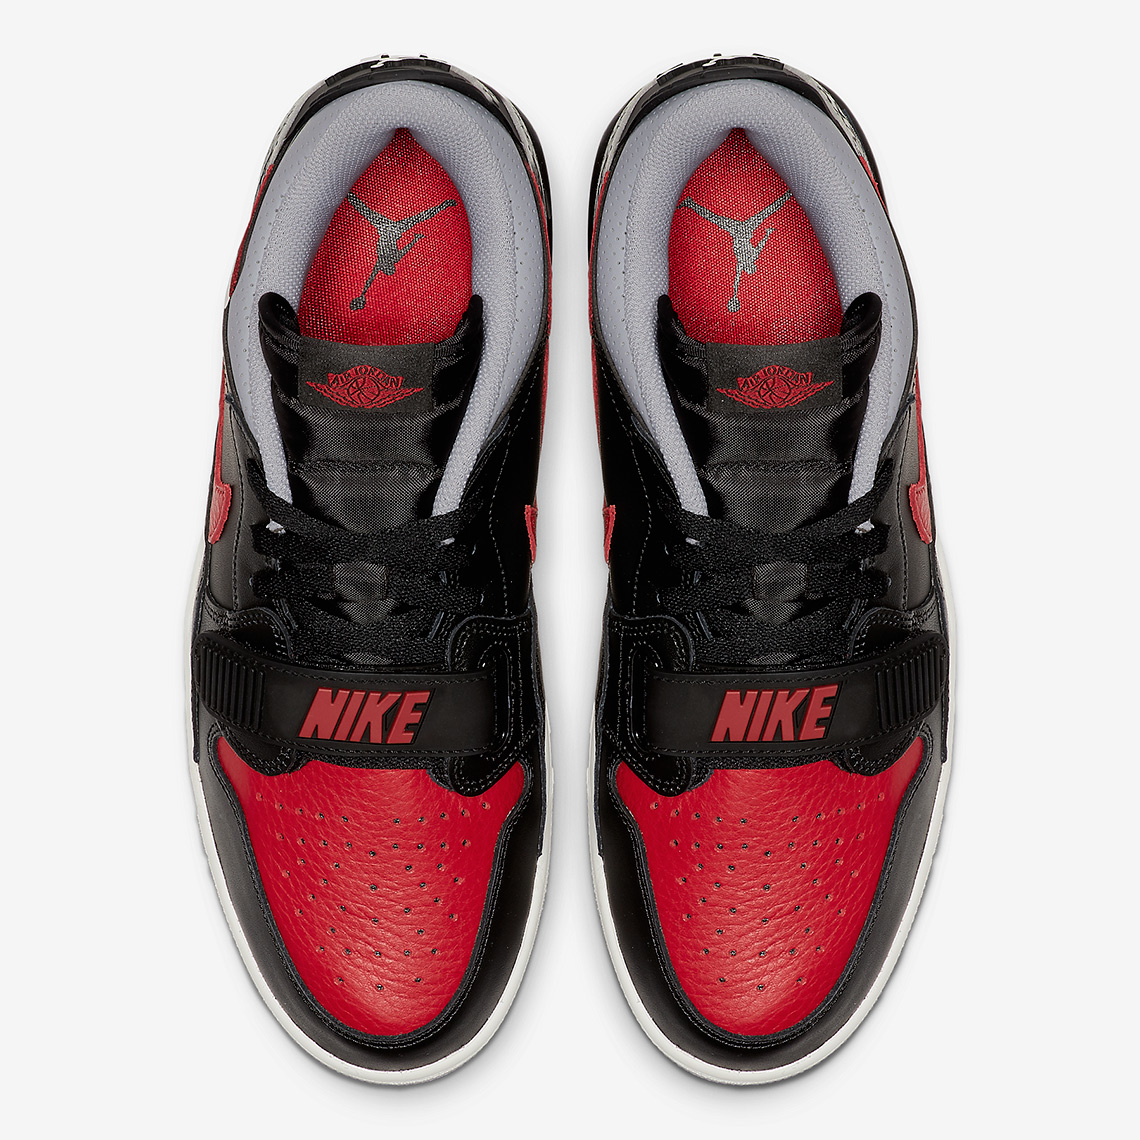 Jordan Legacy 312 Low To Debut In &quot;Bred&quot; Colorway: Details